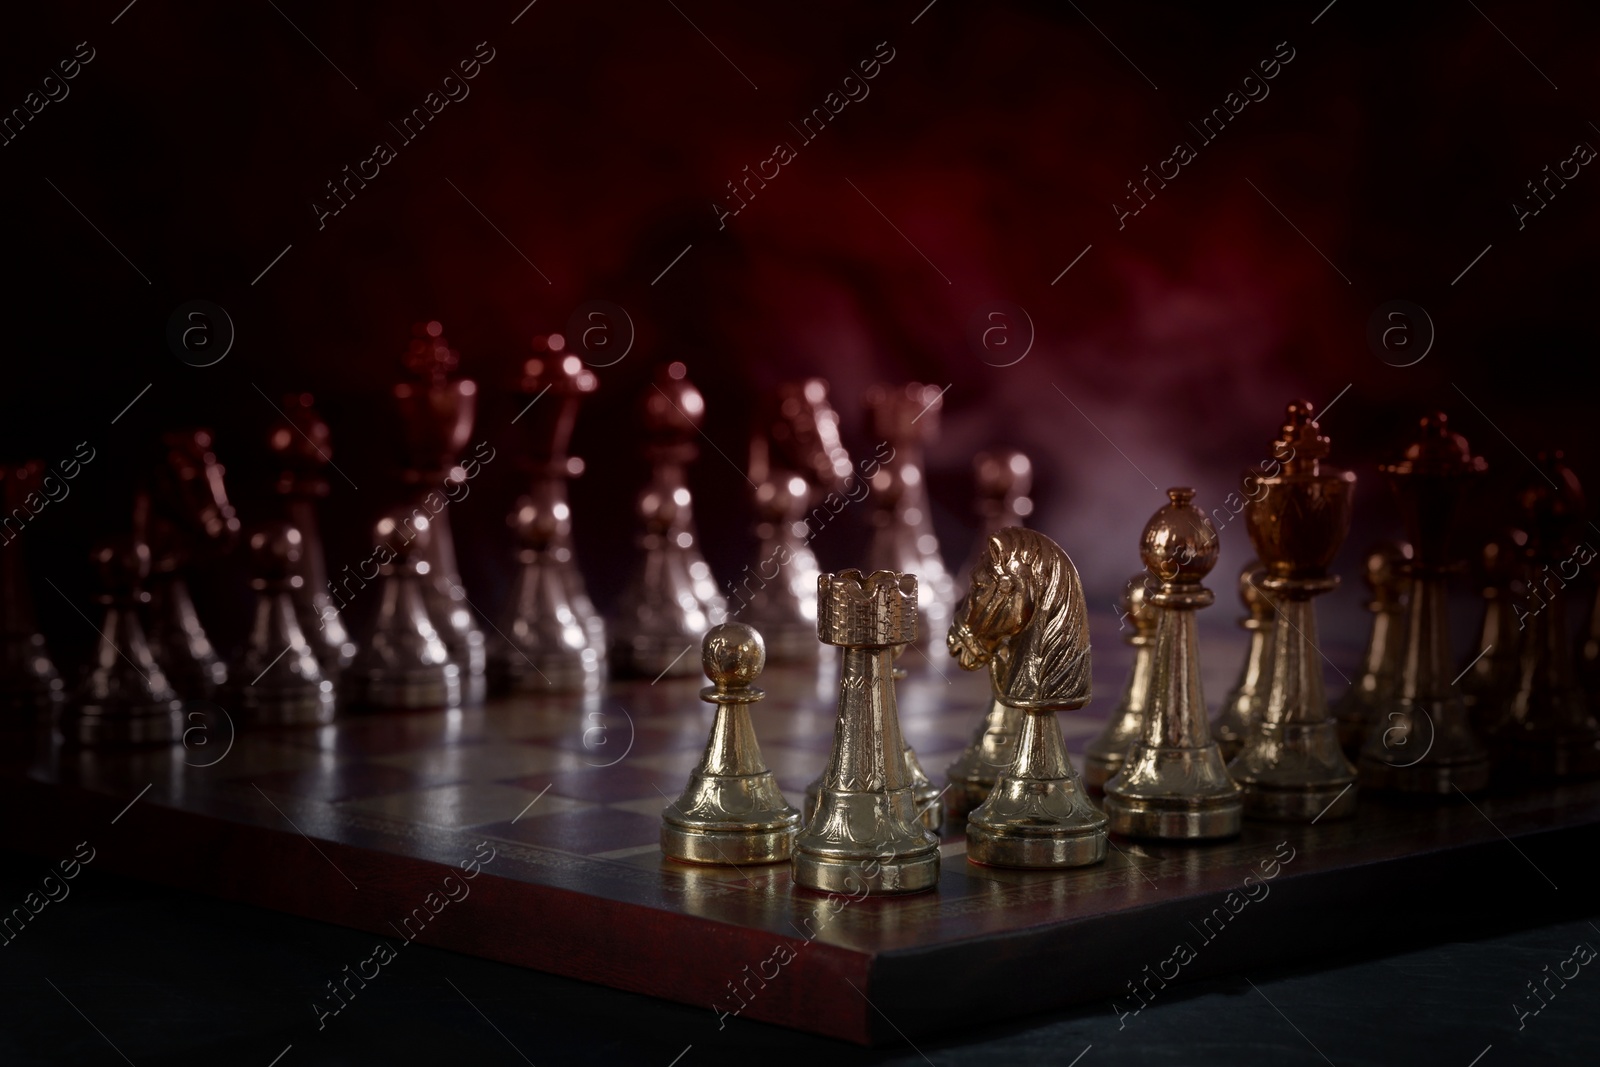 Image of Chessboard with game pieces in starting position surrounded by smoke on black background